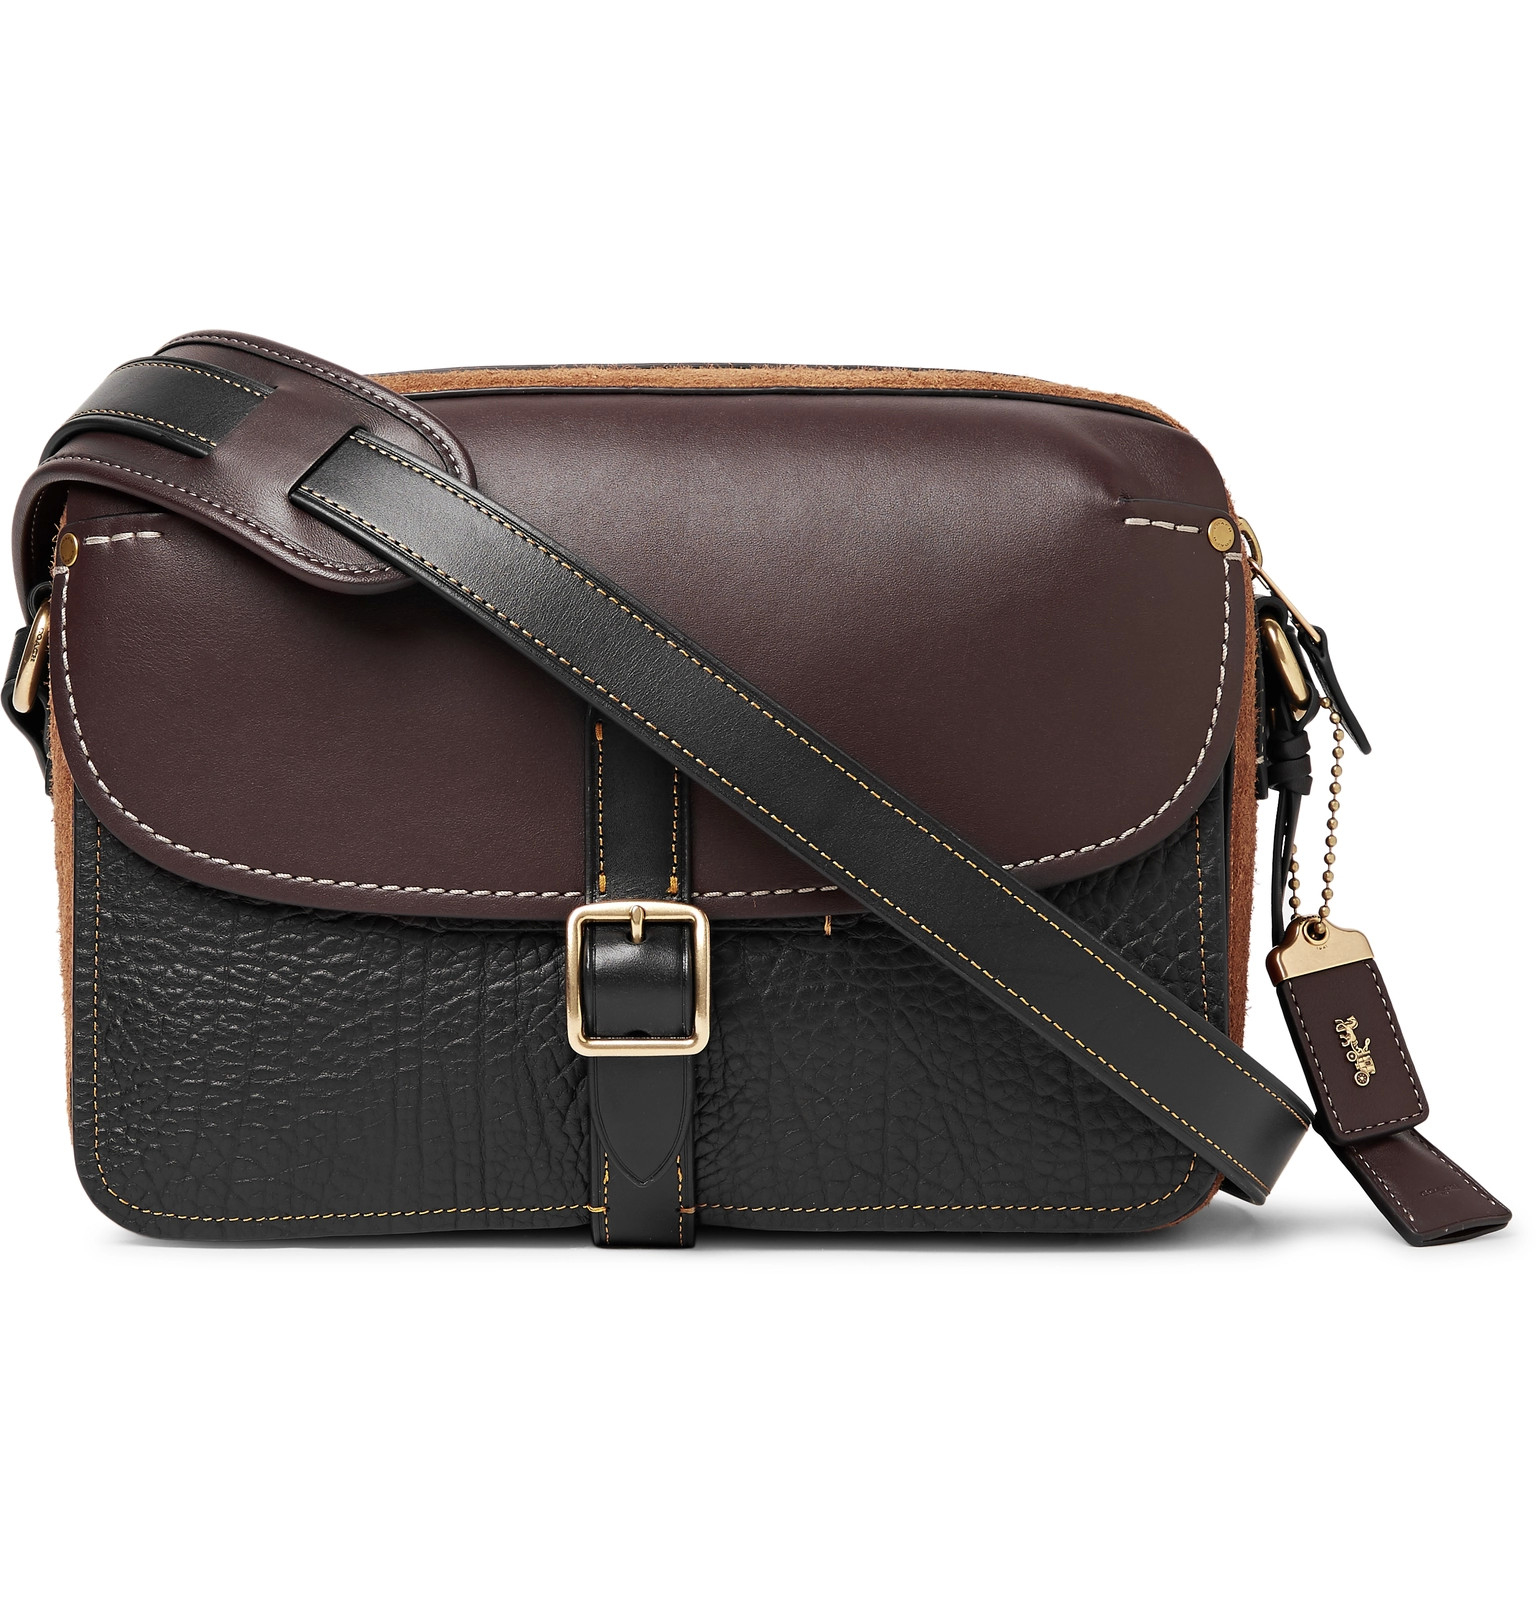 COACH Gotham Suede And Leather Messenger Bag in Black for Men - Lyst